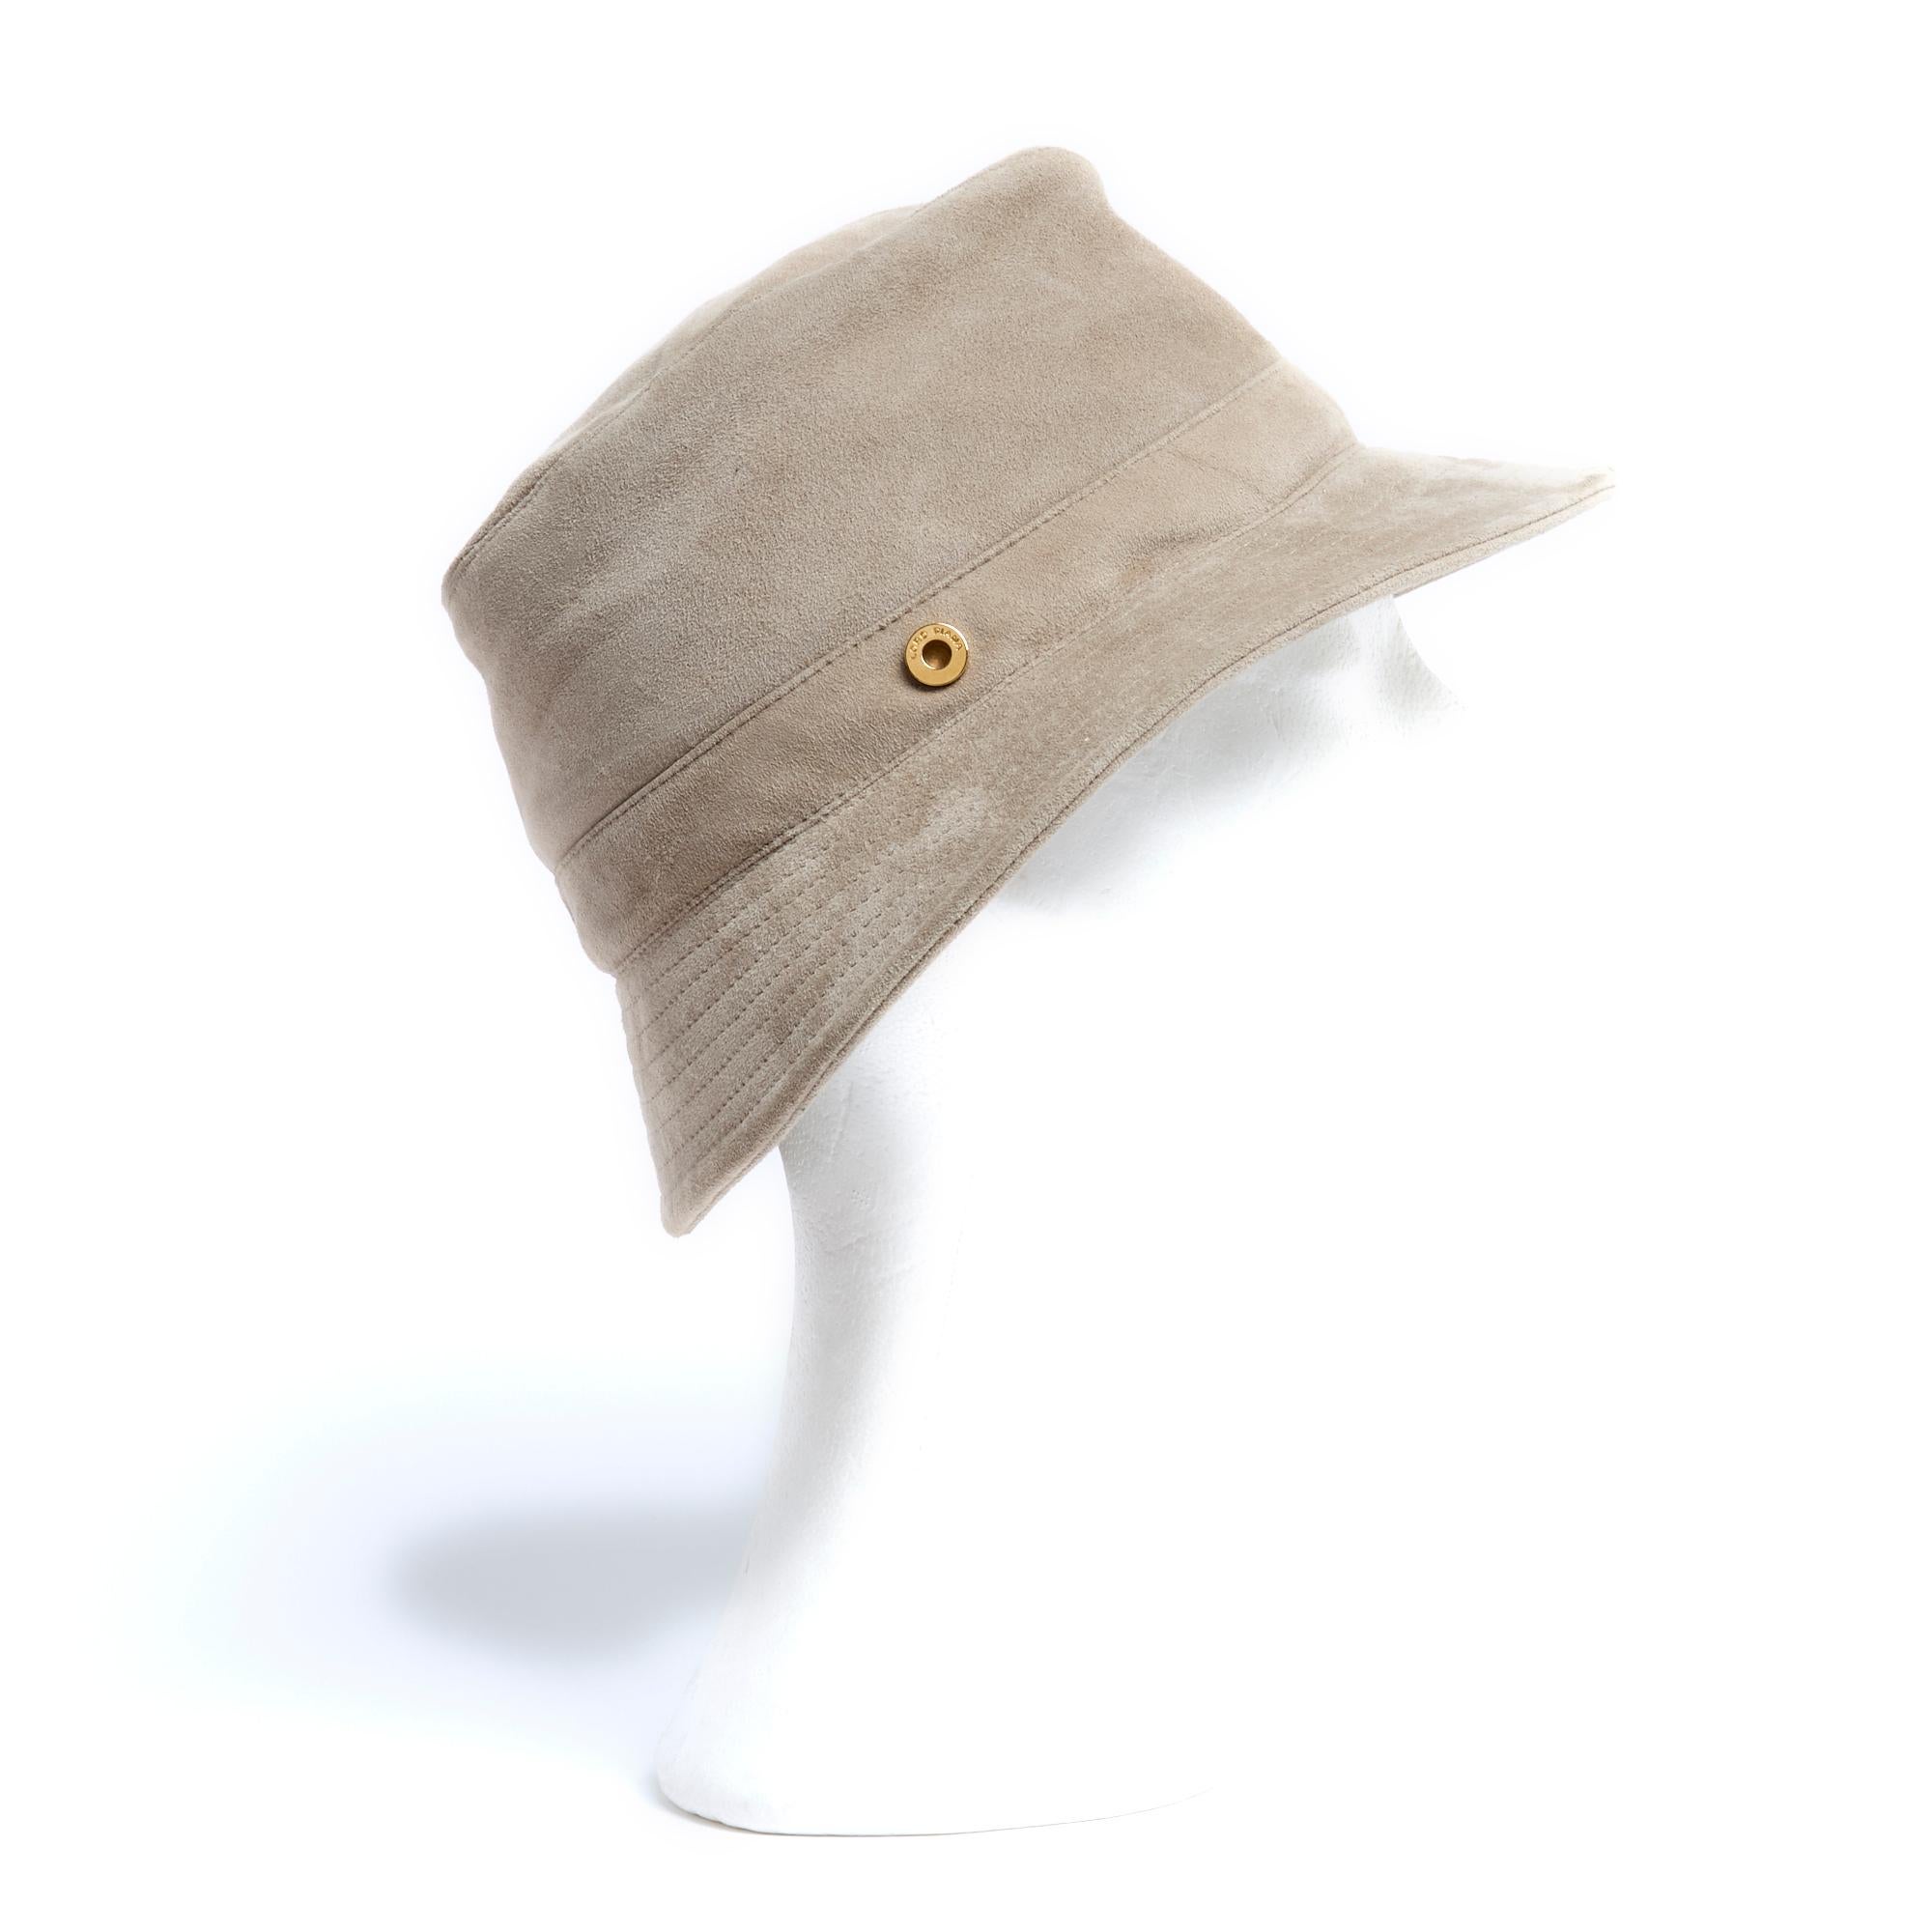 Loro Piana bucket hat in gray beige suede with stitched edges, satin canvas lining. Size M, approximately 56 cm head circumference. The hat has been worn but is in very good condition, perfect for sunny days.